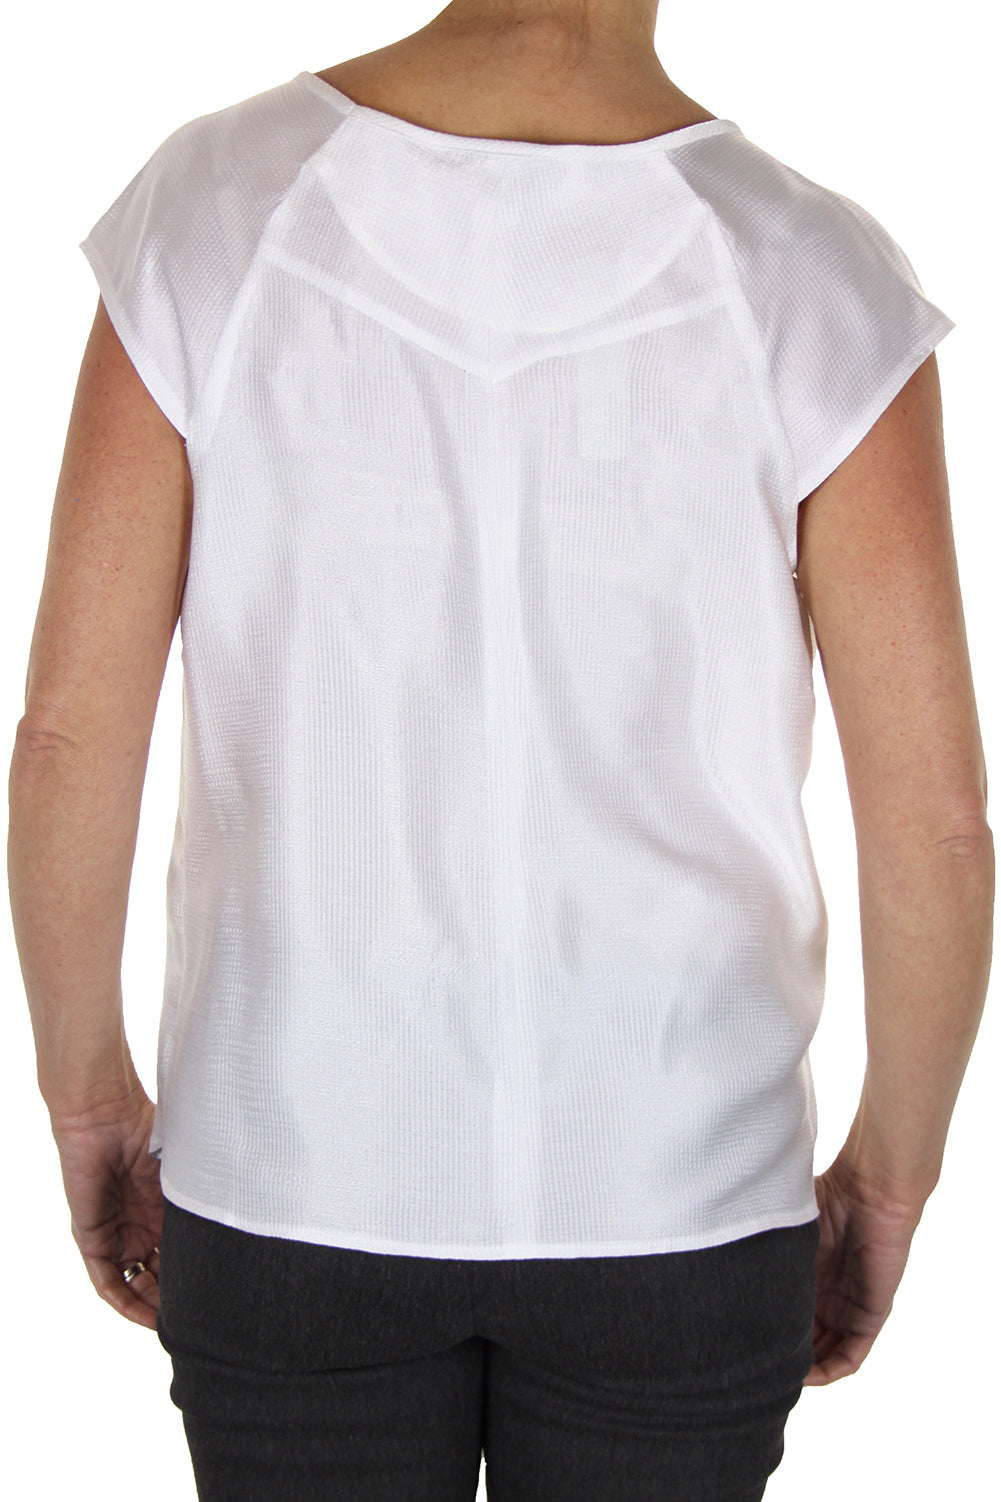 Silky Feel Textured Top With Shine White